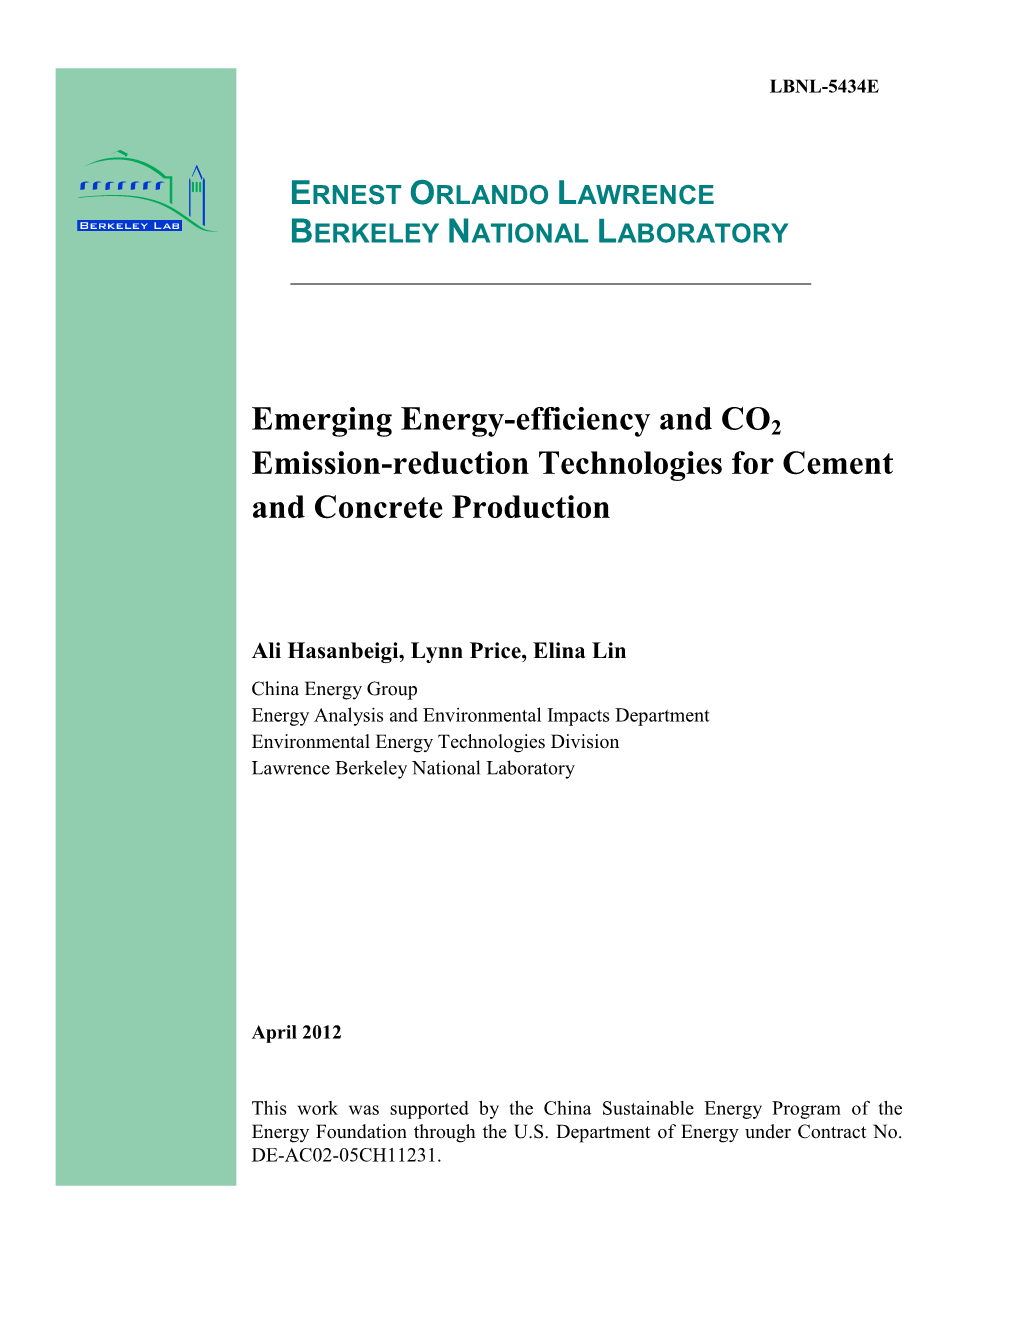 Emerging Energy-Efficiency and CO2 Emission-Reduction Technologies for Cement and Concrete Production